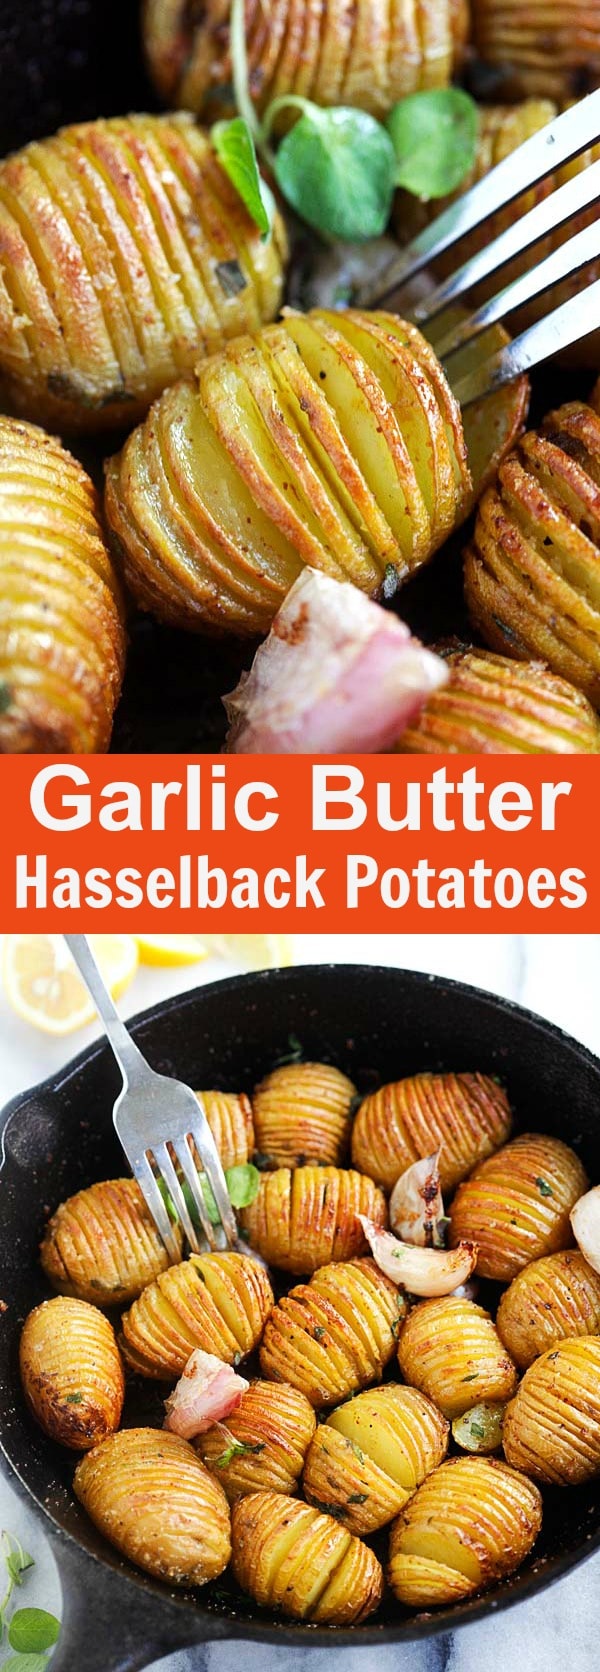 Garlic Butter Hasselback Potatoes - easy roasted potatoes with garlic and butter. Each potato is cut and sliced to form the Hasselback shape | rasamalaysia.com